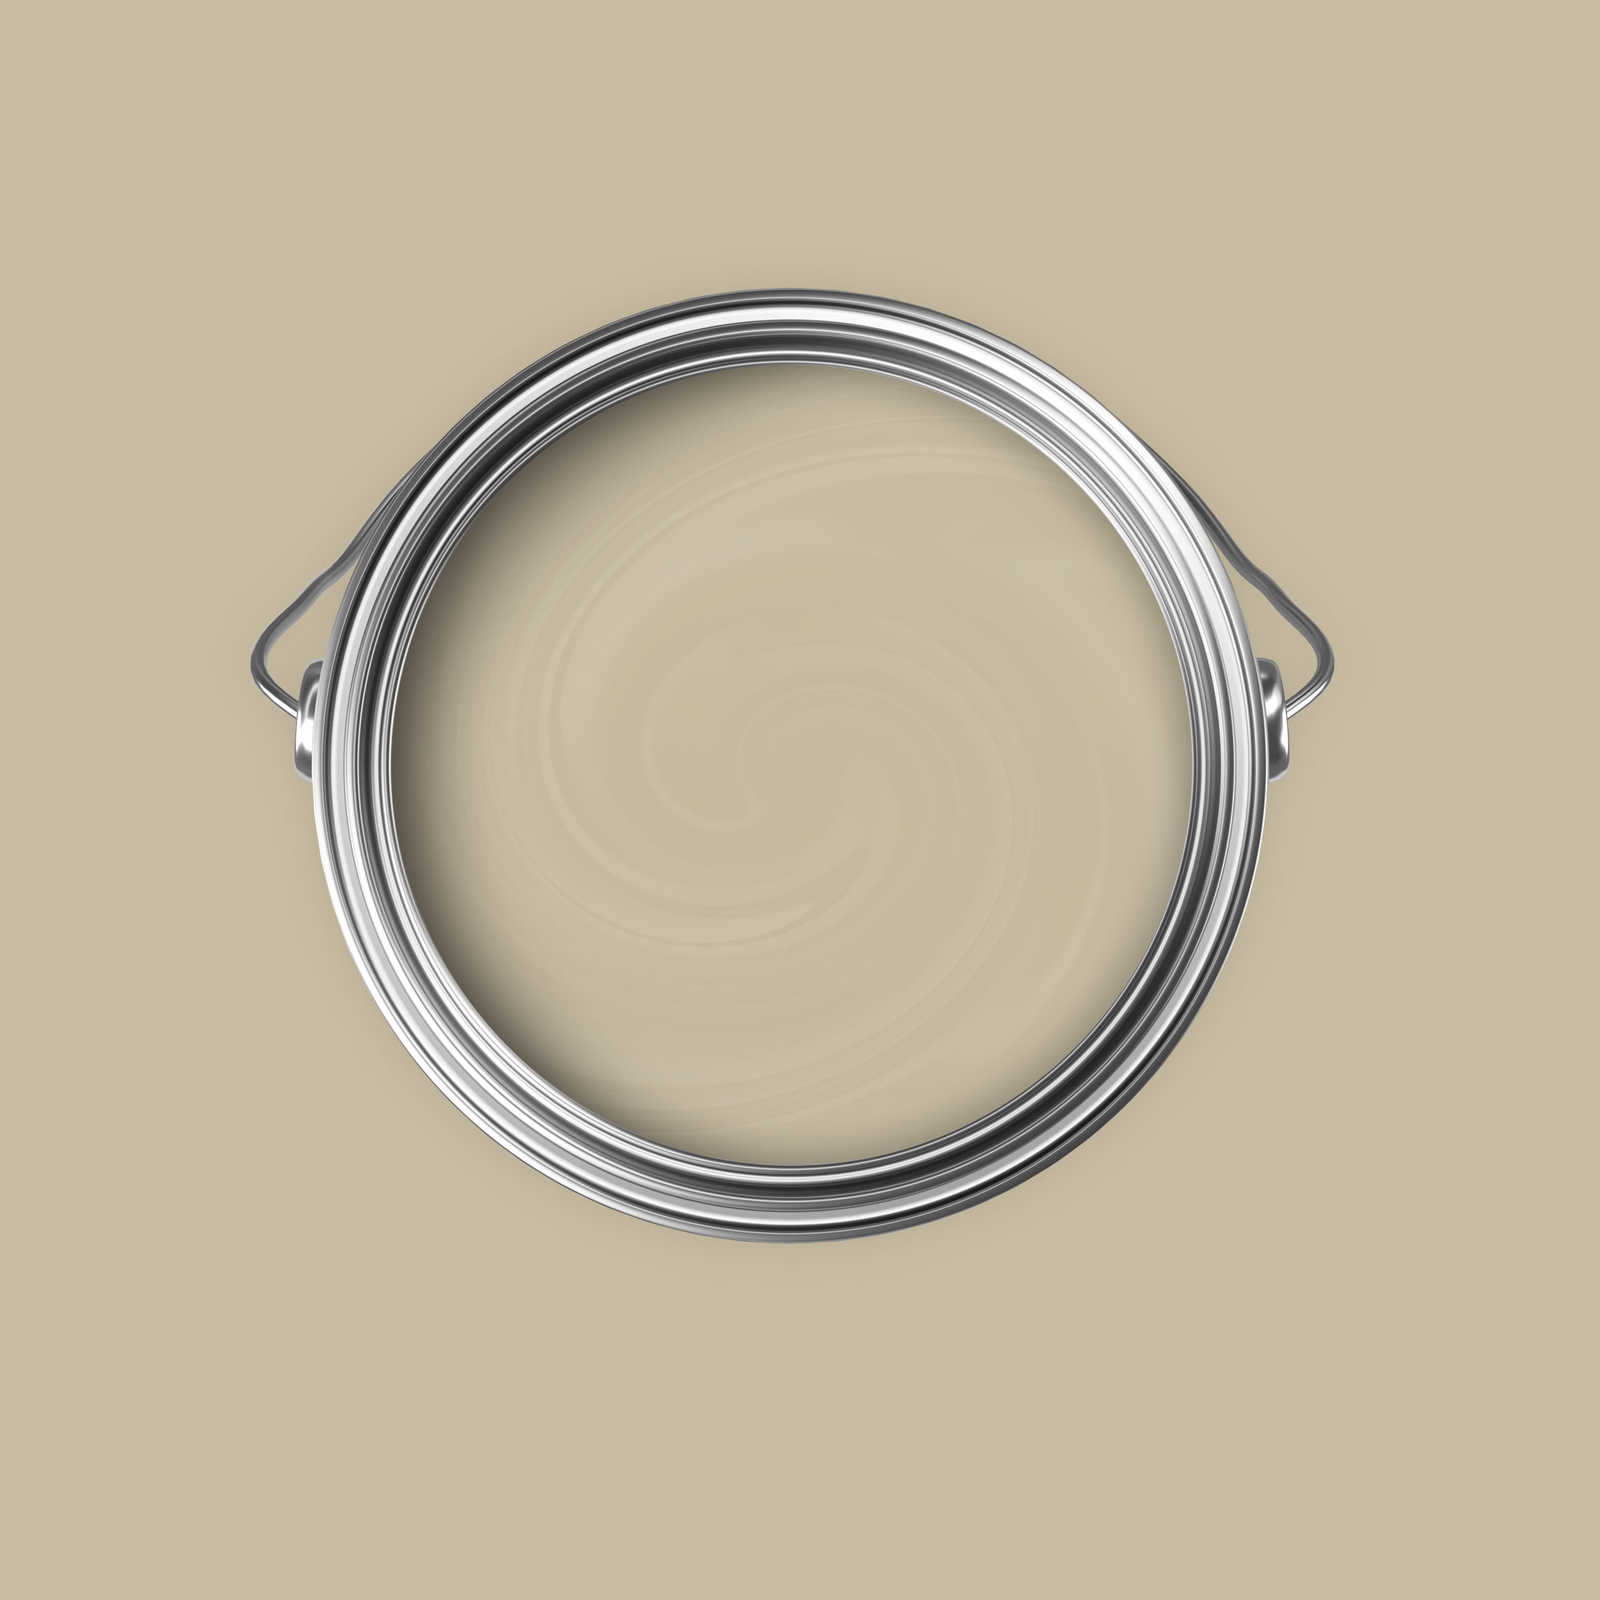             Premium Wall Paint homely light beige »Lucky Lime« NW604 – 5 litre
        